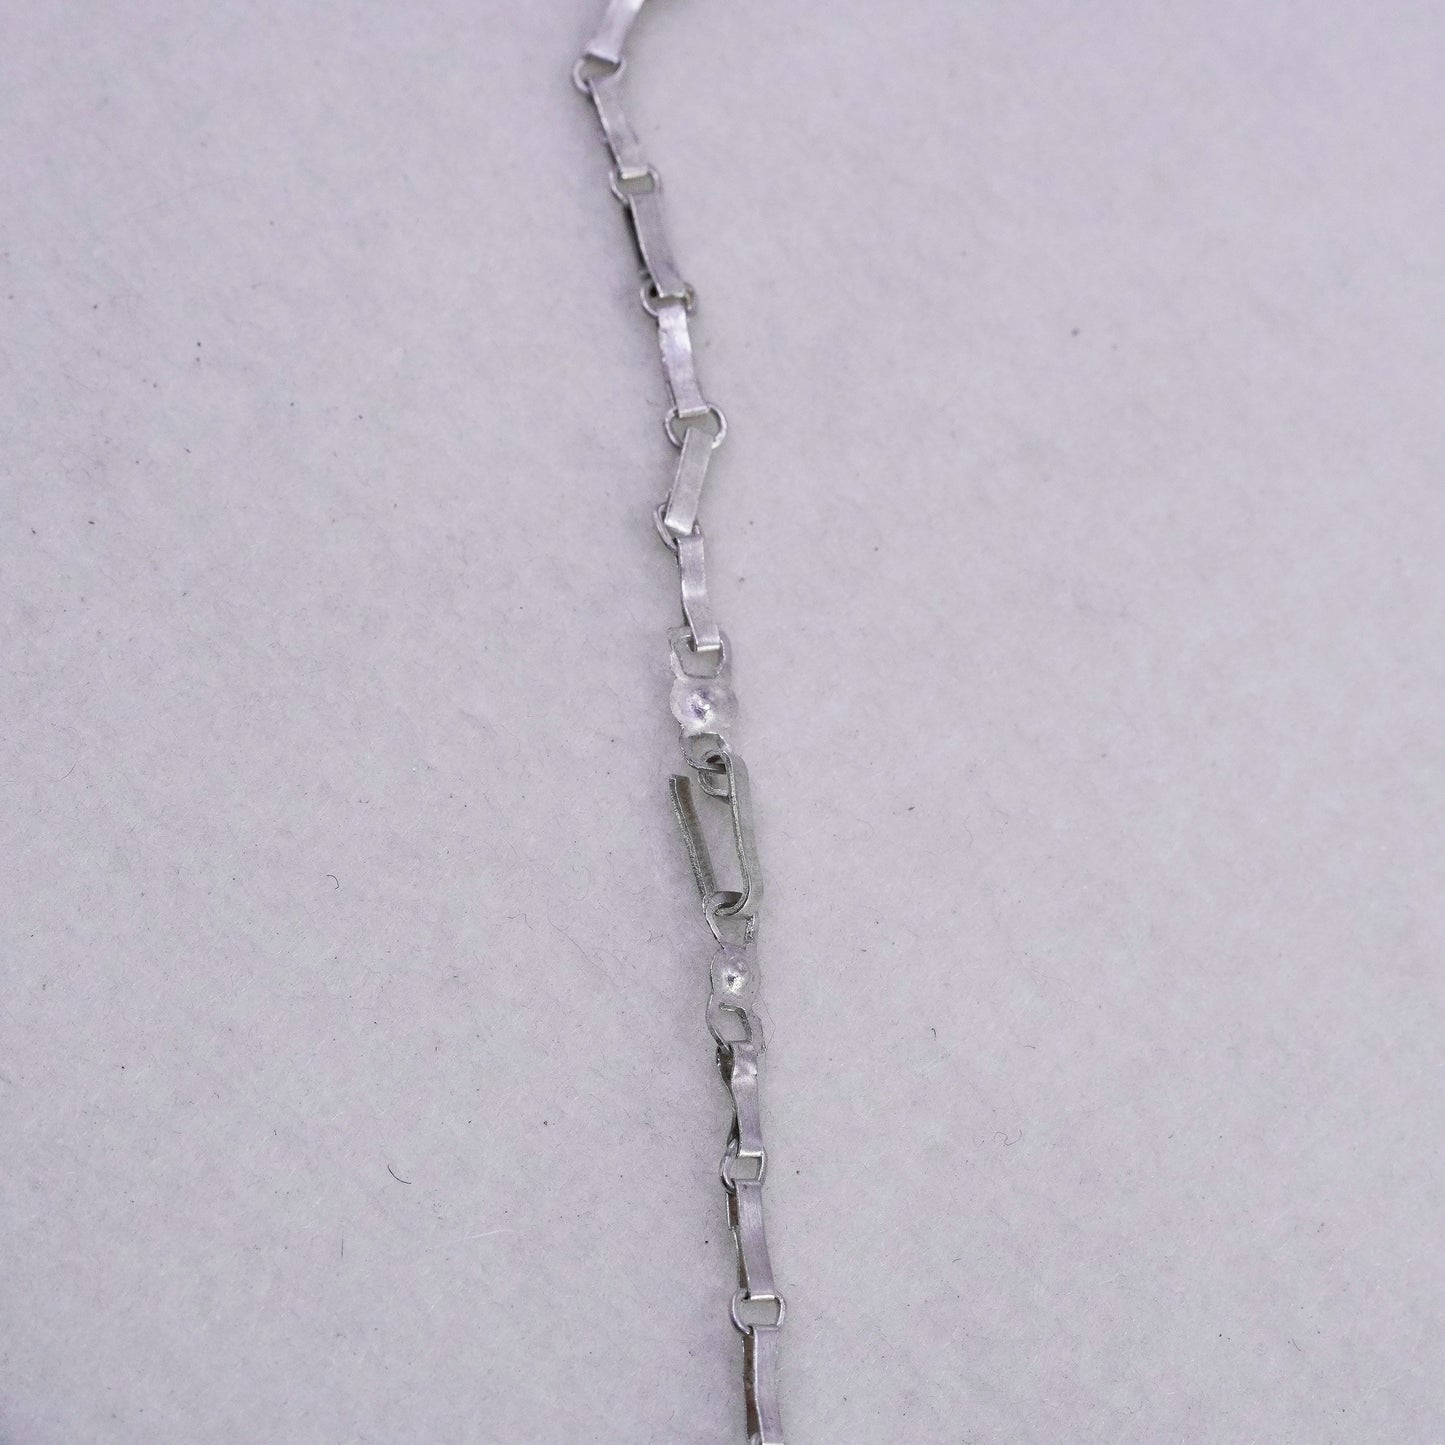 18”, Sterling 950 silver handmade elongated chain necklace with fringe pendant